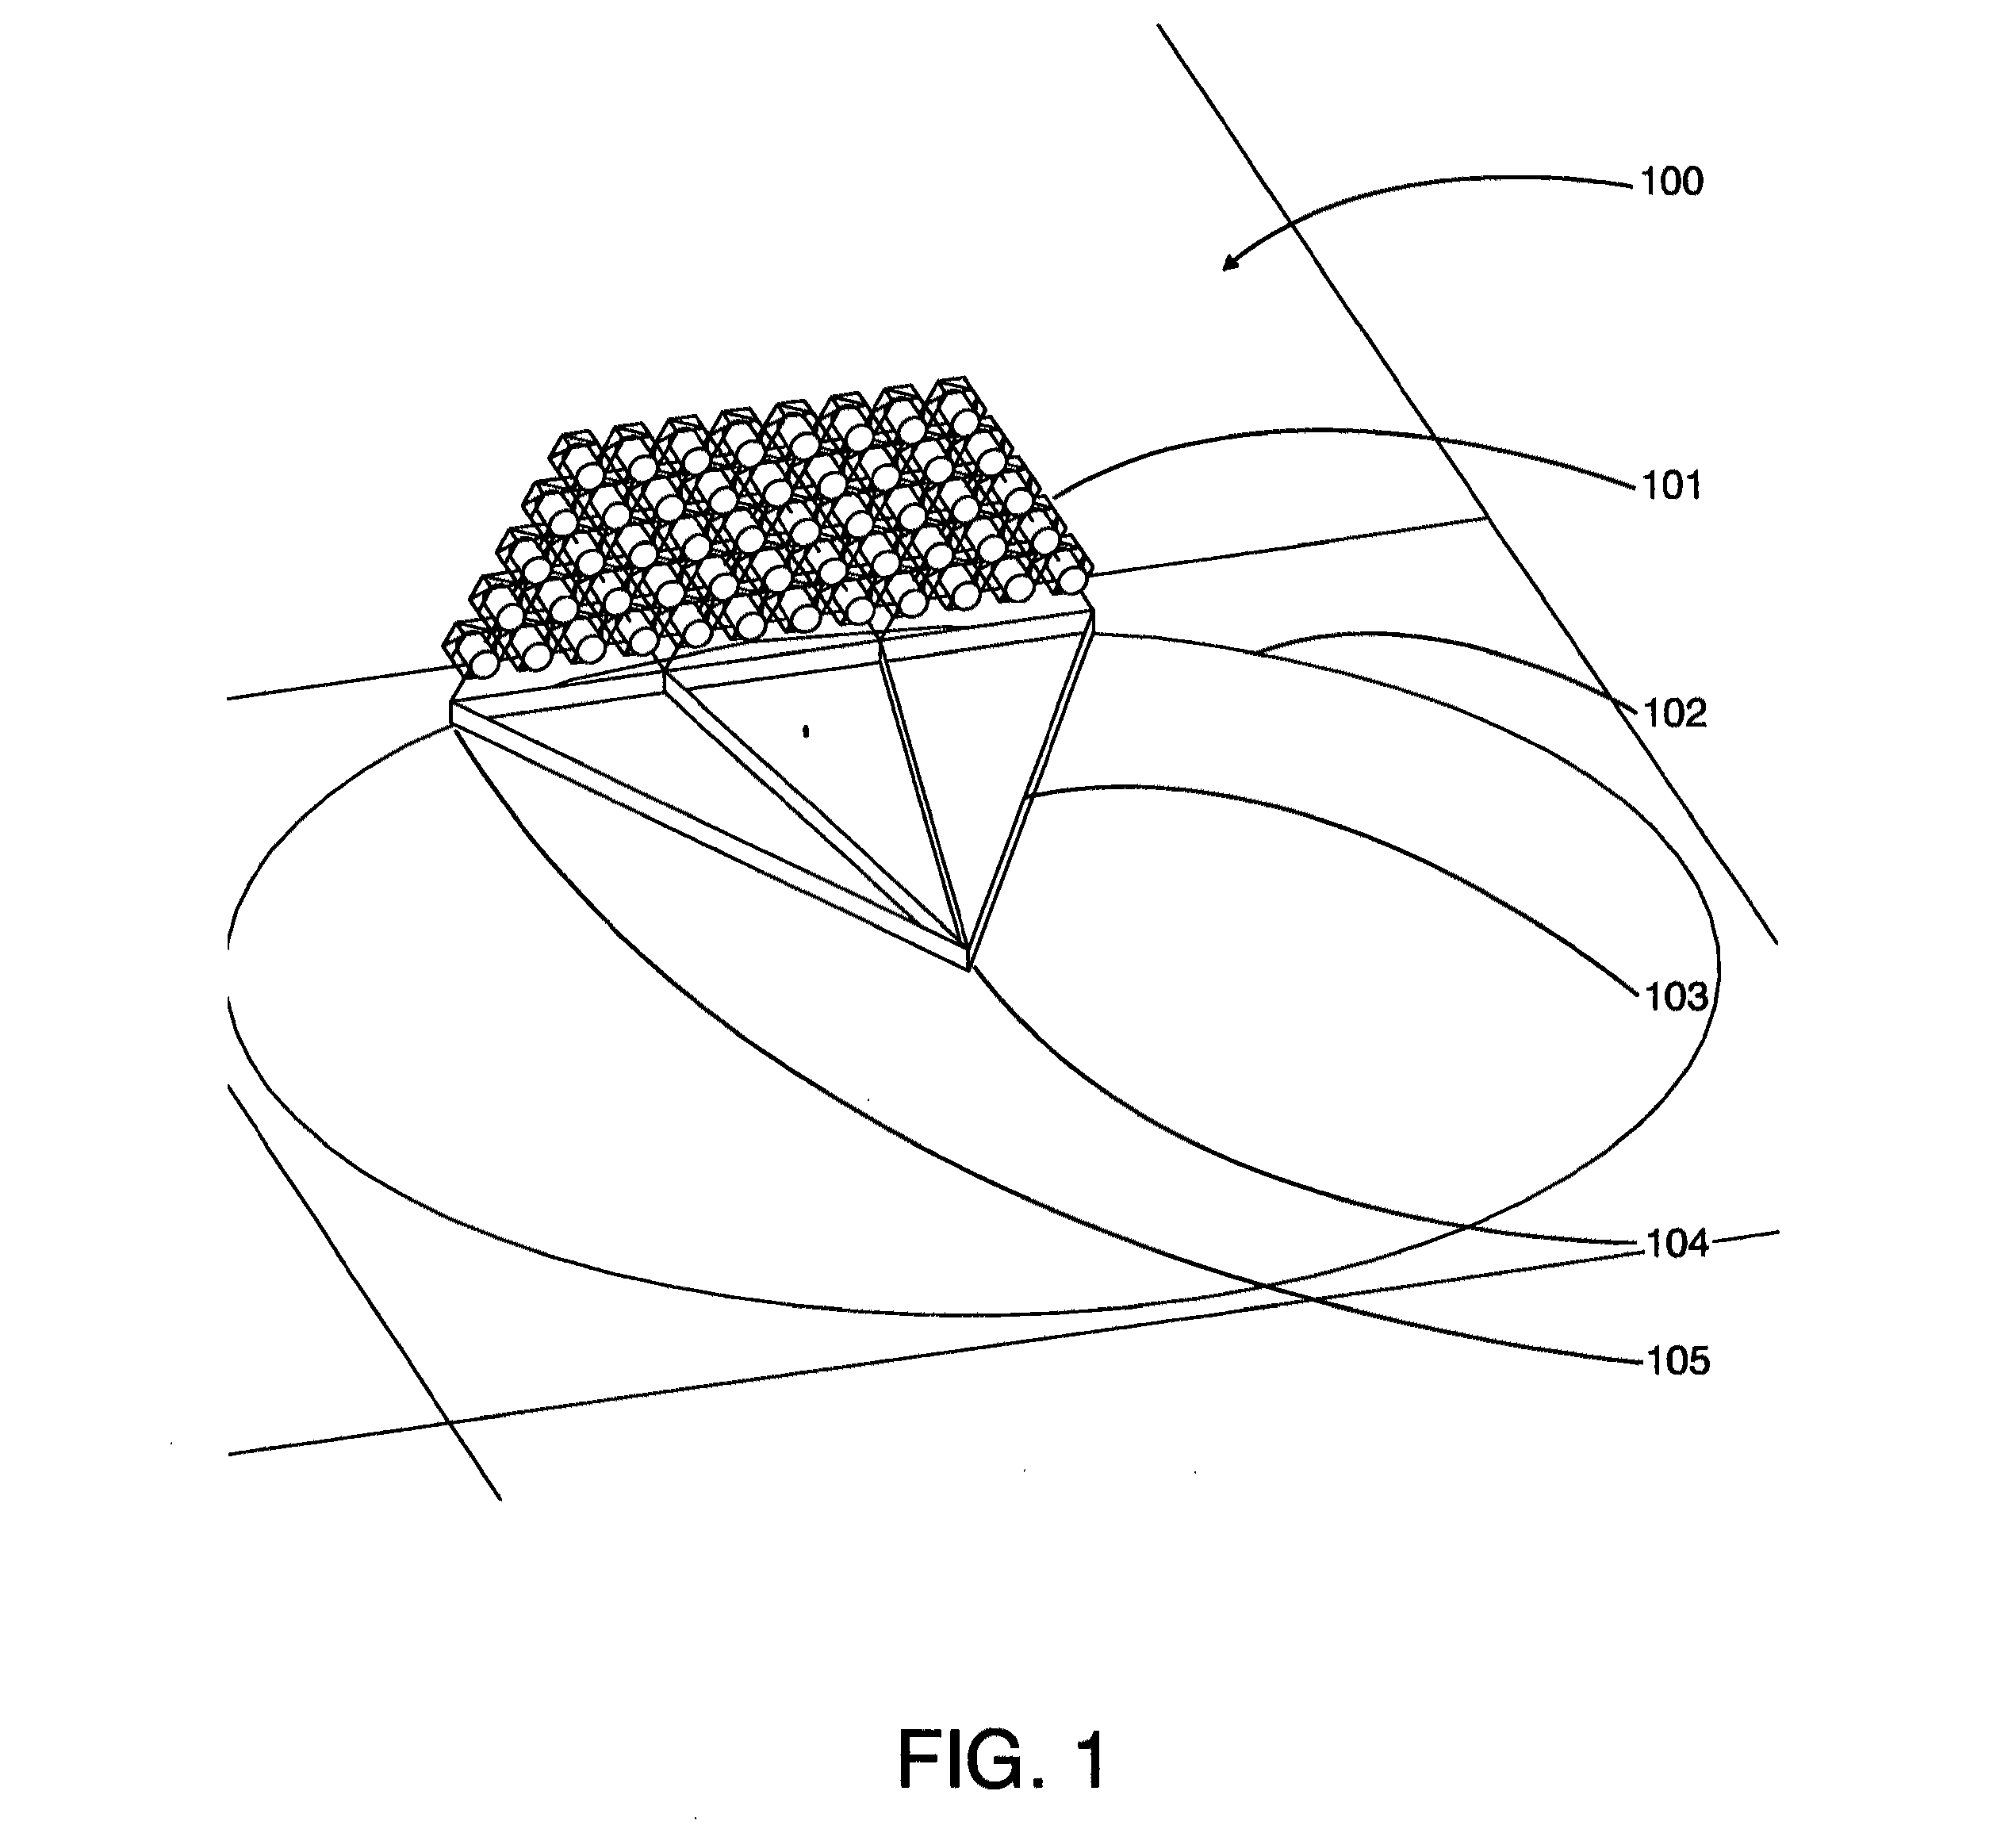 Pivoting structural cellular wall for wind energy generation